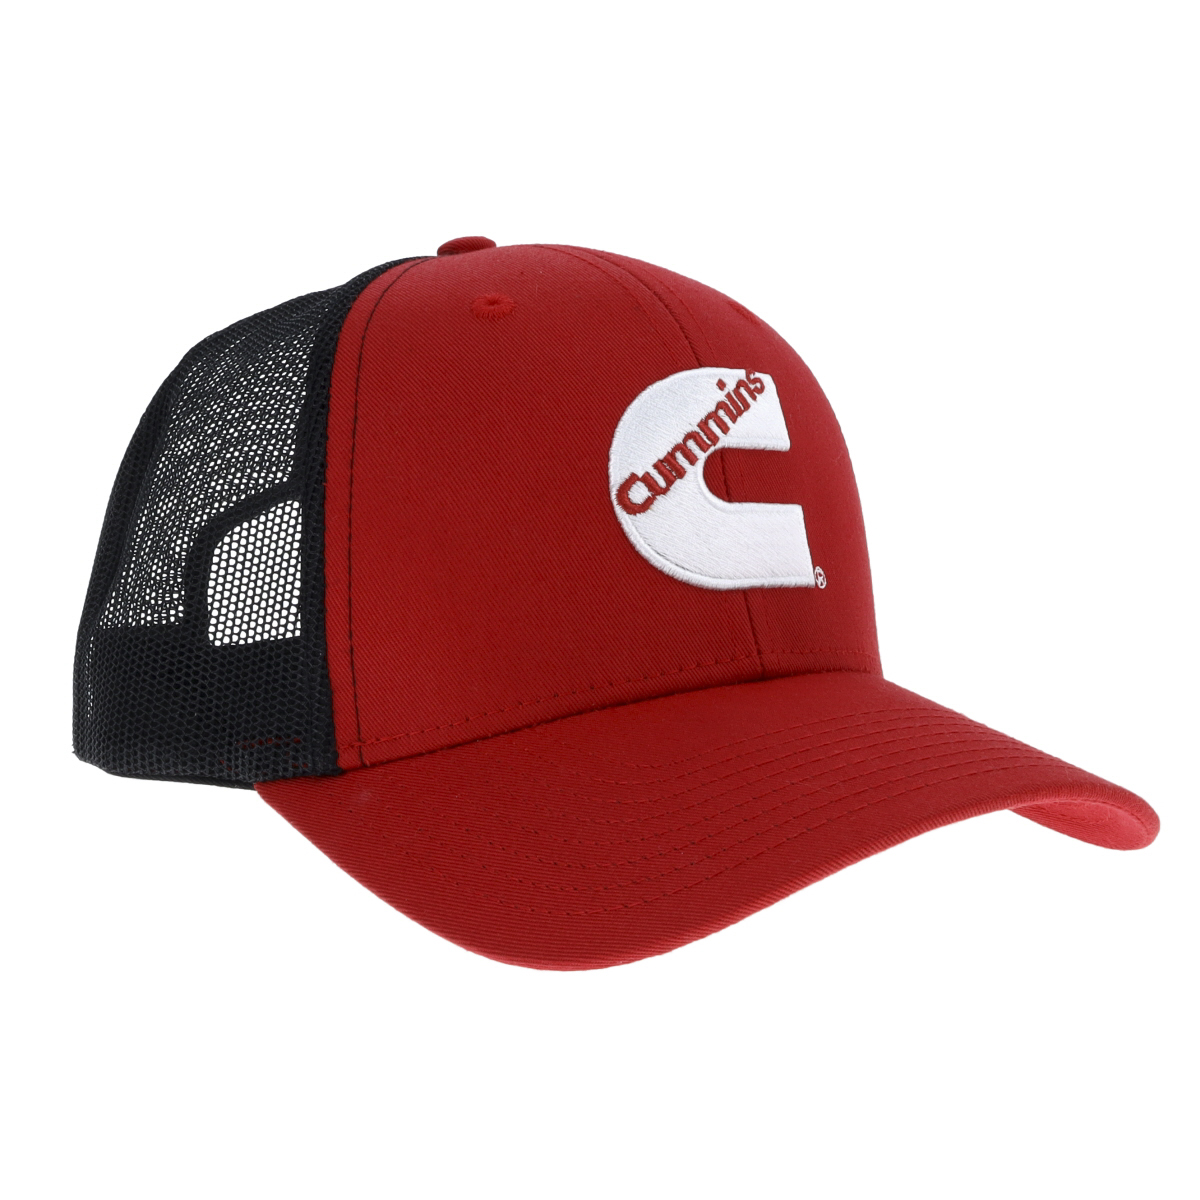 Trucker Hat with Mesh Back, Red